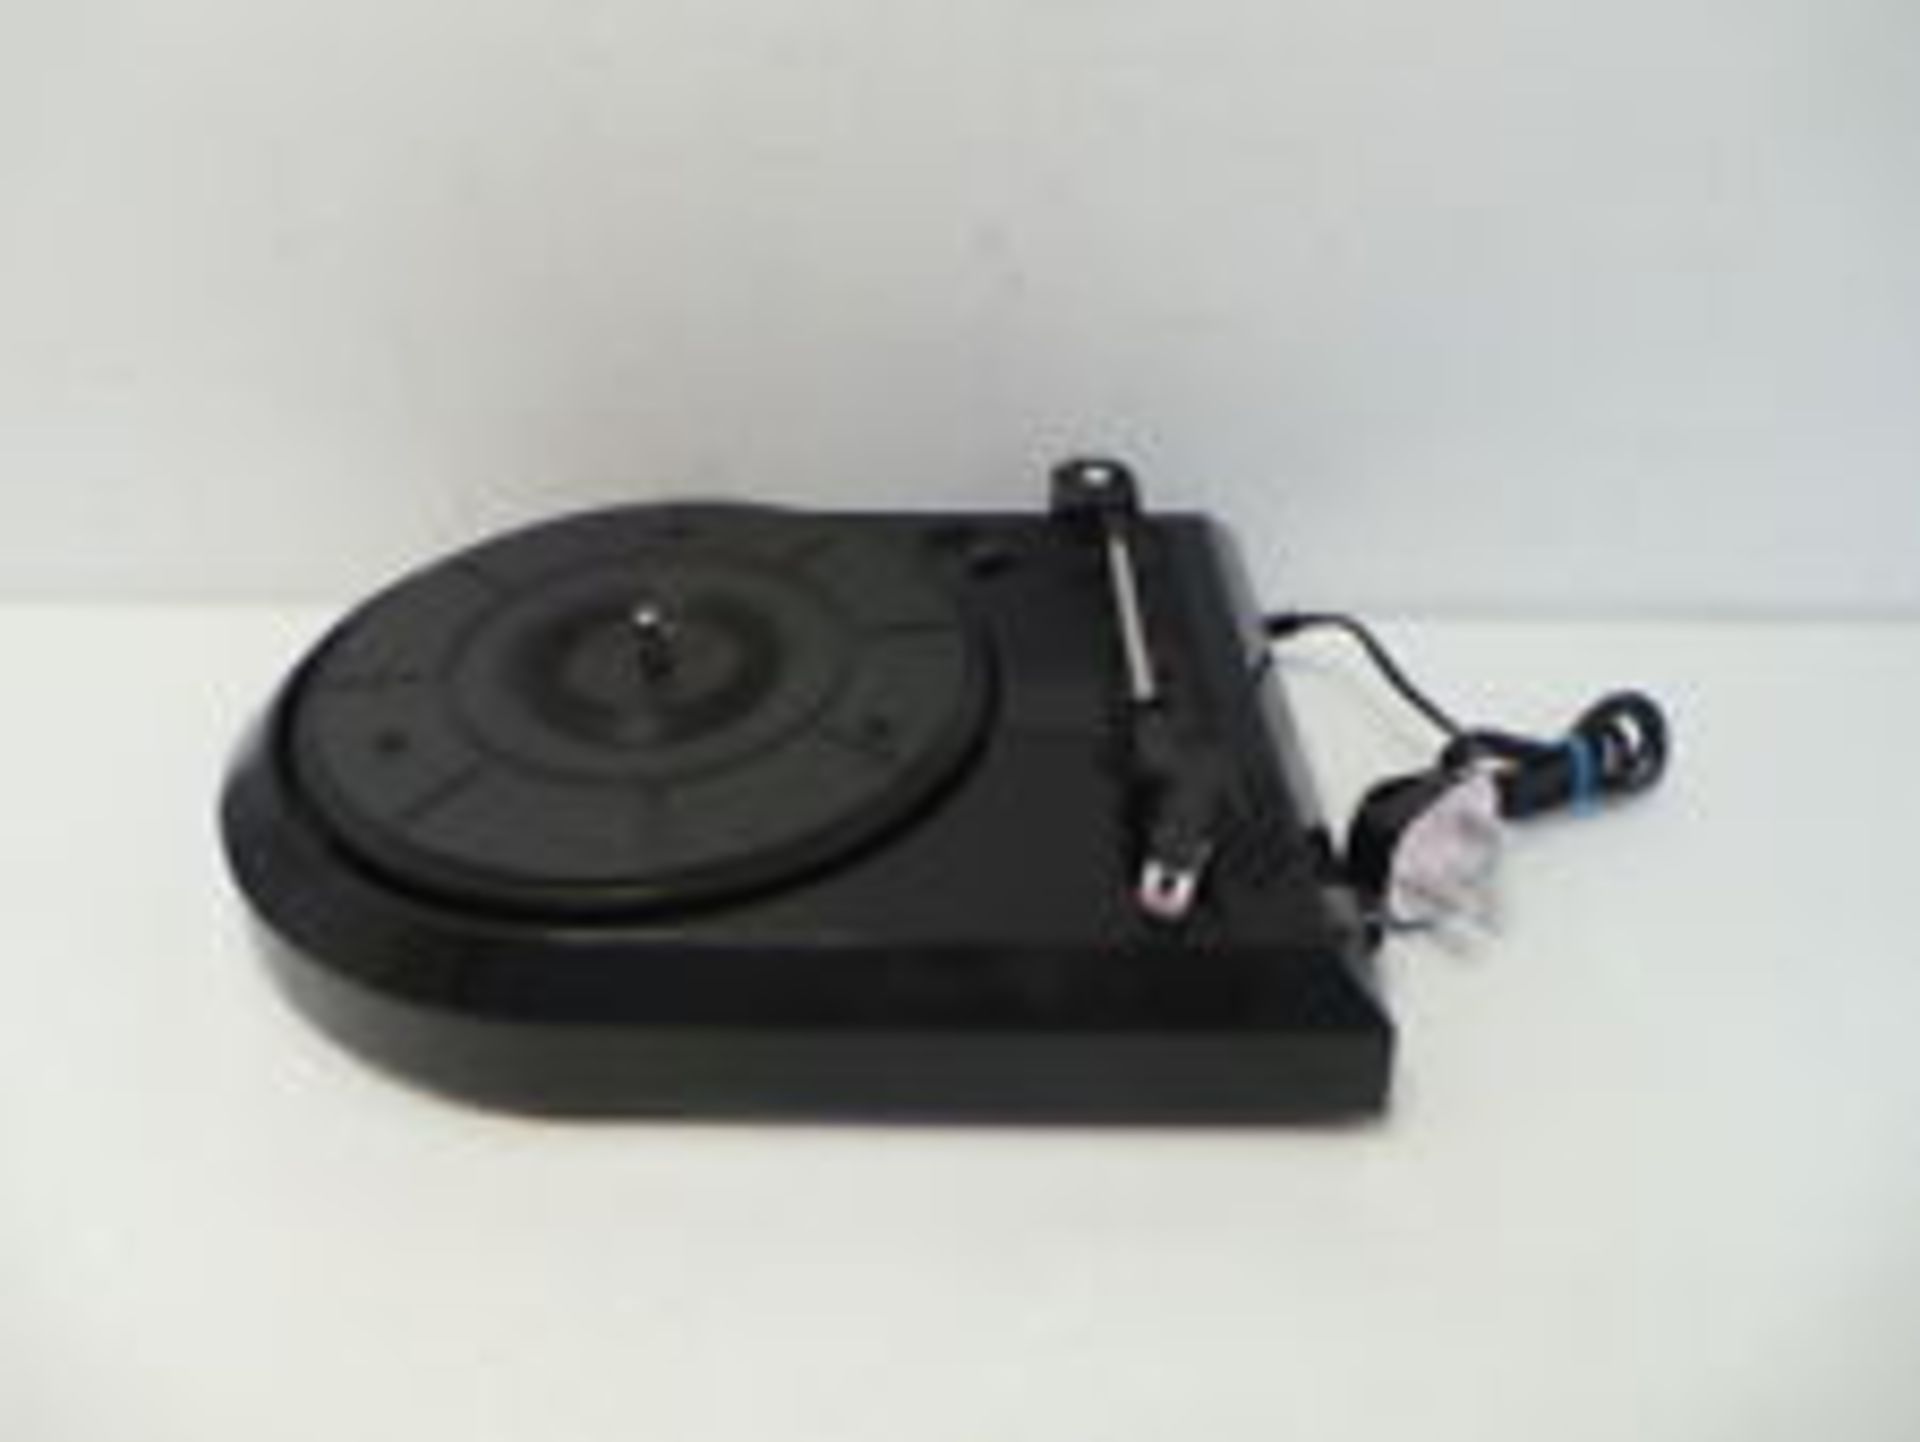 V *TRADE QTY* Brand New Zennox USB Turntable With Built In Speaker With Volume Control Convert LP - Bild 2 aus 2